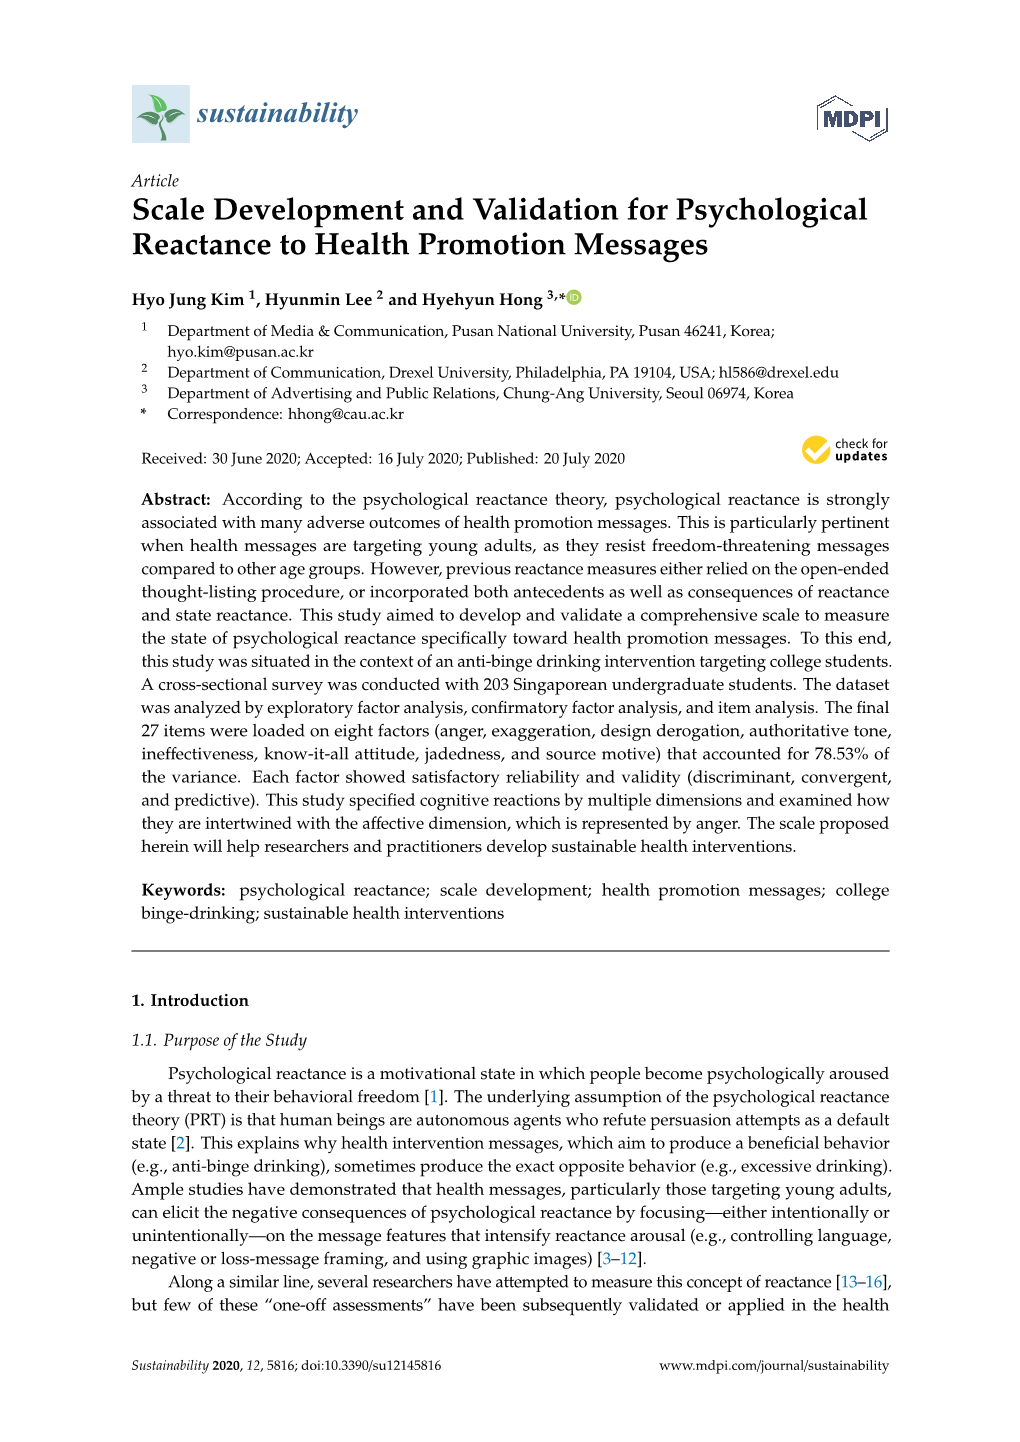 Scale Development and Validation for Psychological Reactance to Health Promotion Messages